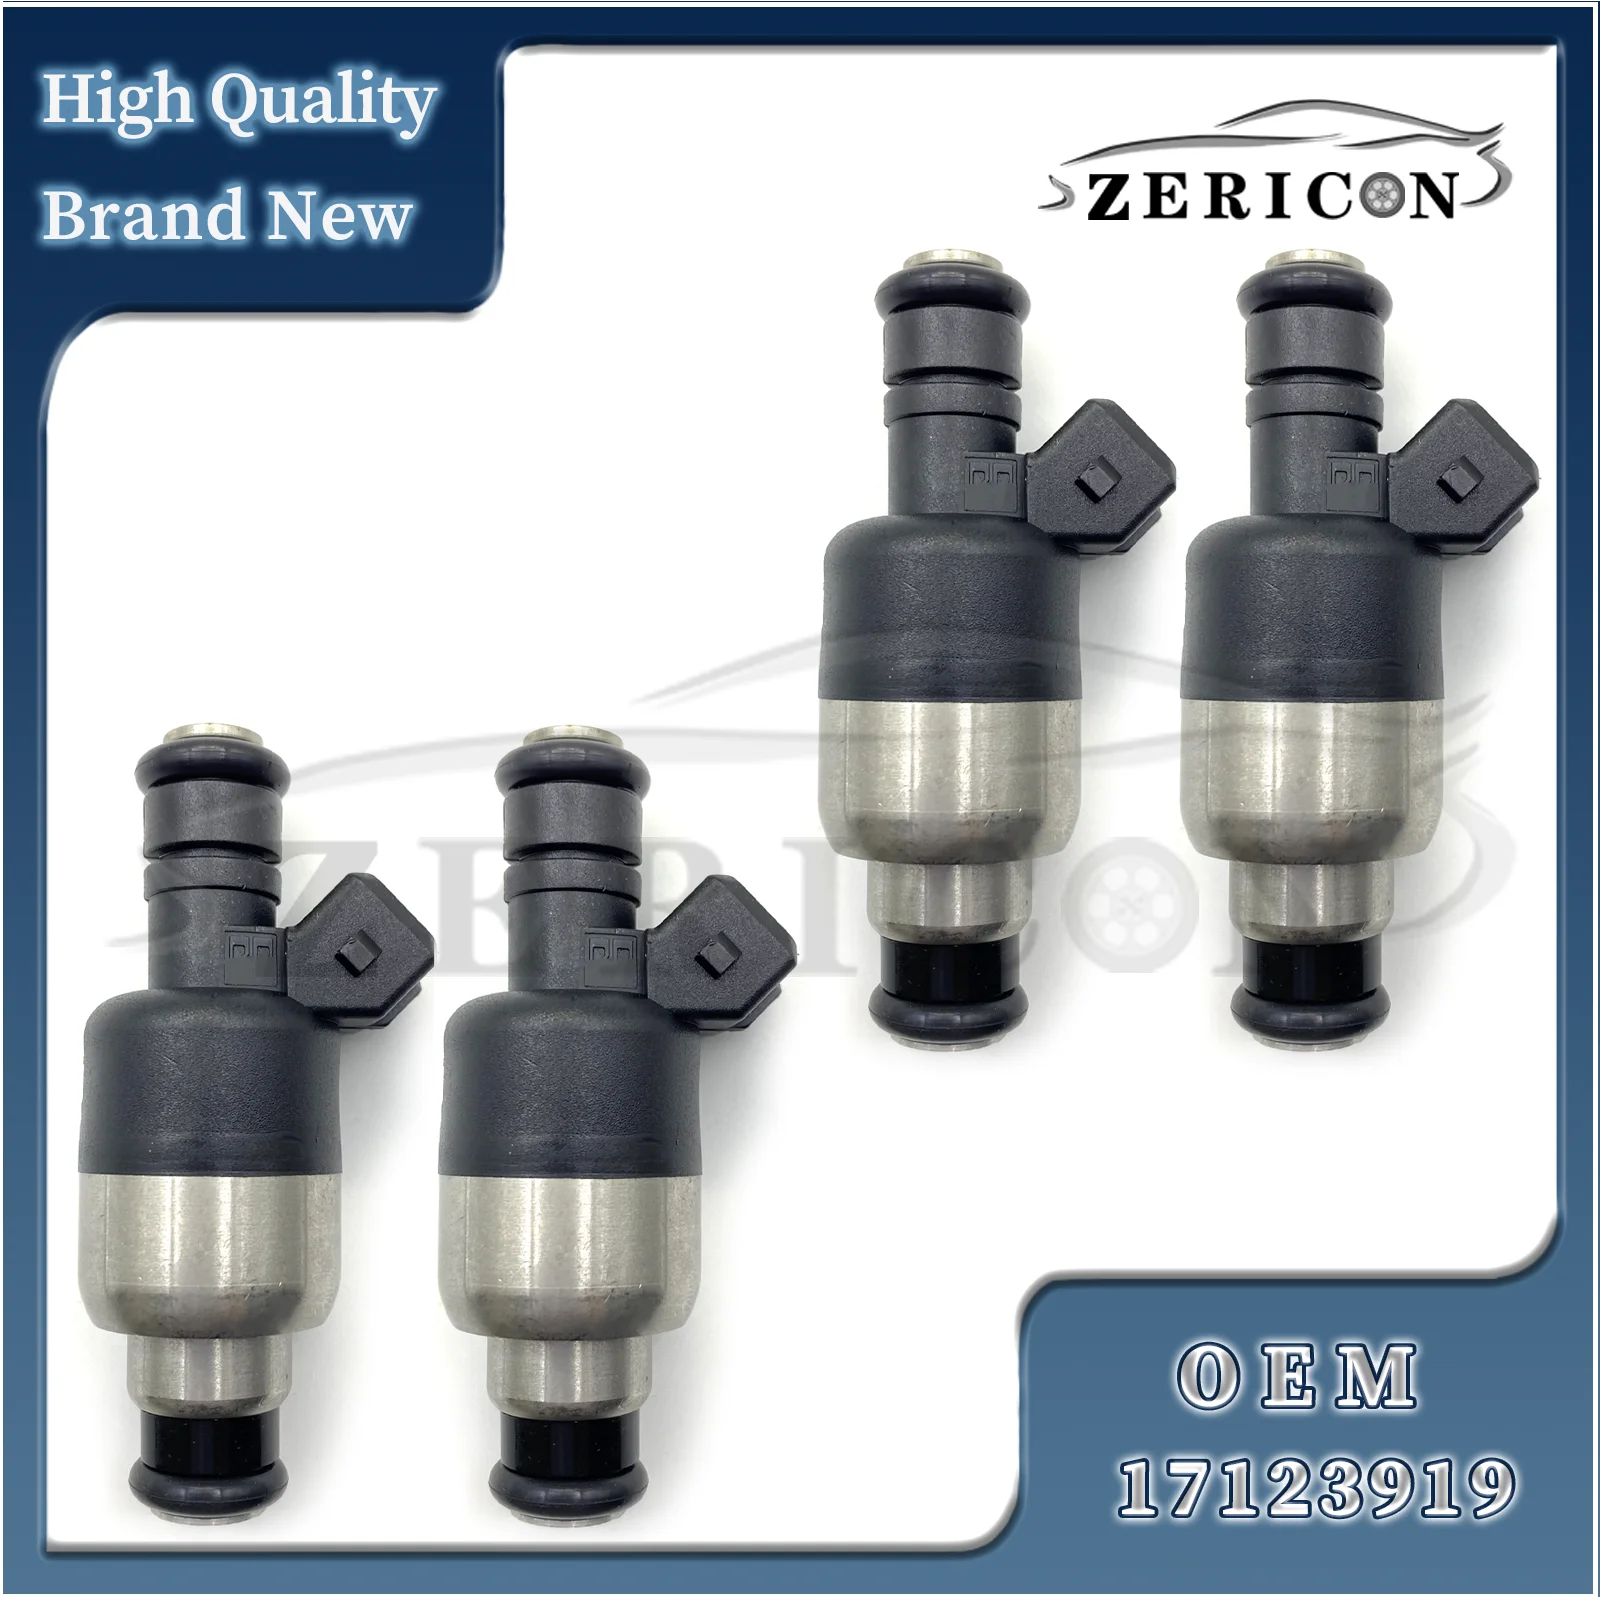 

4Pcs 17123919 Fuel Injector Nozzle 17124717 For Chevrolet Corsa 1996-1998 For Opel Corsa 1.0 Mpfi 8V INJ670 For GM Car Injector